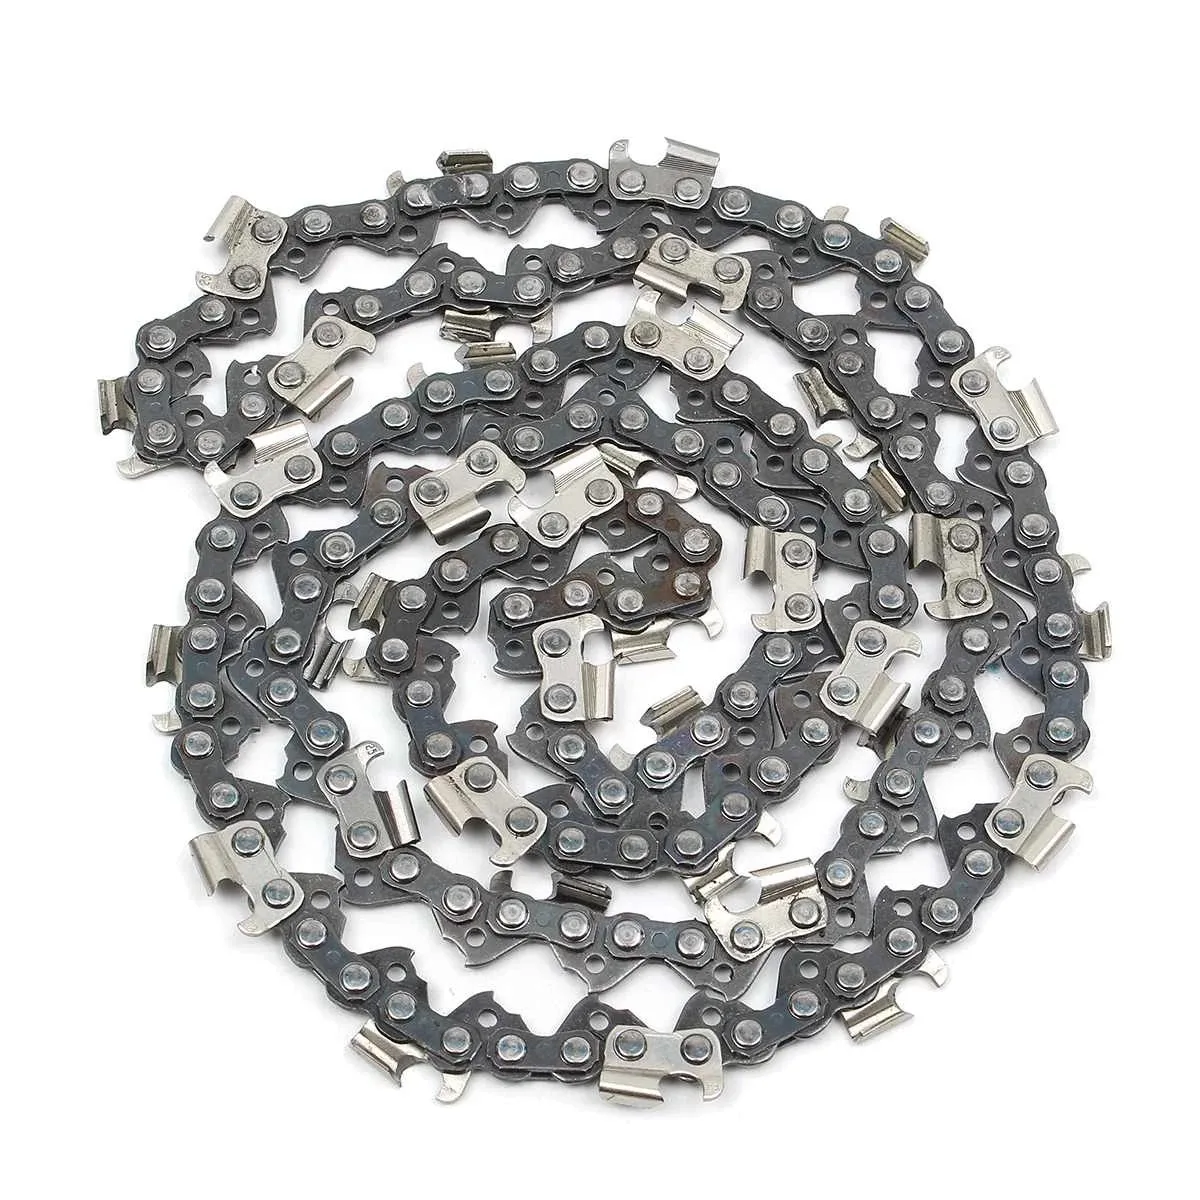 

2x 14 Inch Chainsaw Saw Chain 3/8''LP .050 '' 50DL For STIHL 018 MS180 MS181 Outdoor Construction With No Further Finish Re